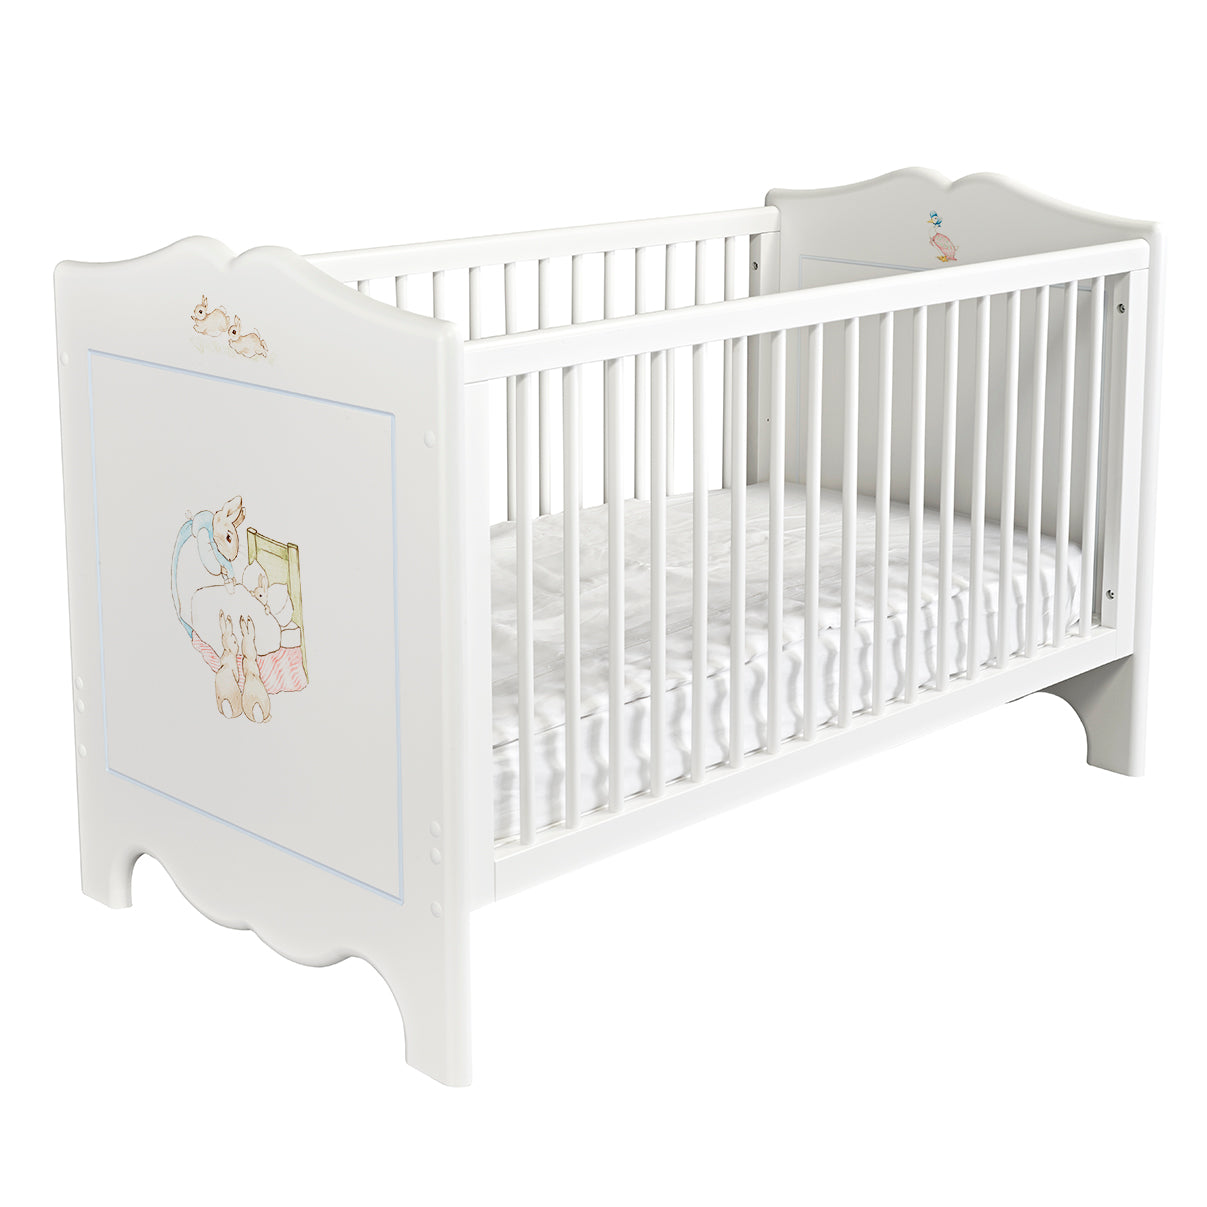 Dragons Cot Bed - Beatrix Potter with Blissful Blue Trim